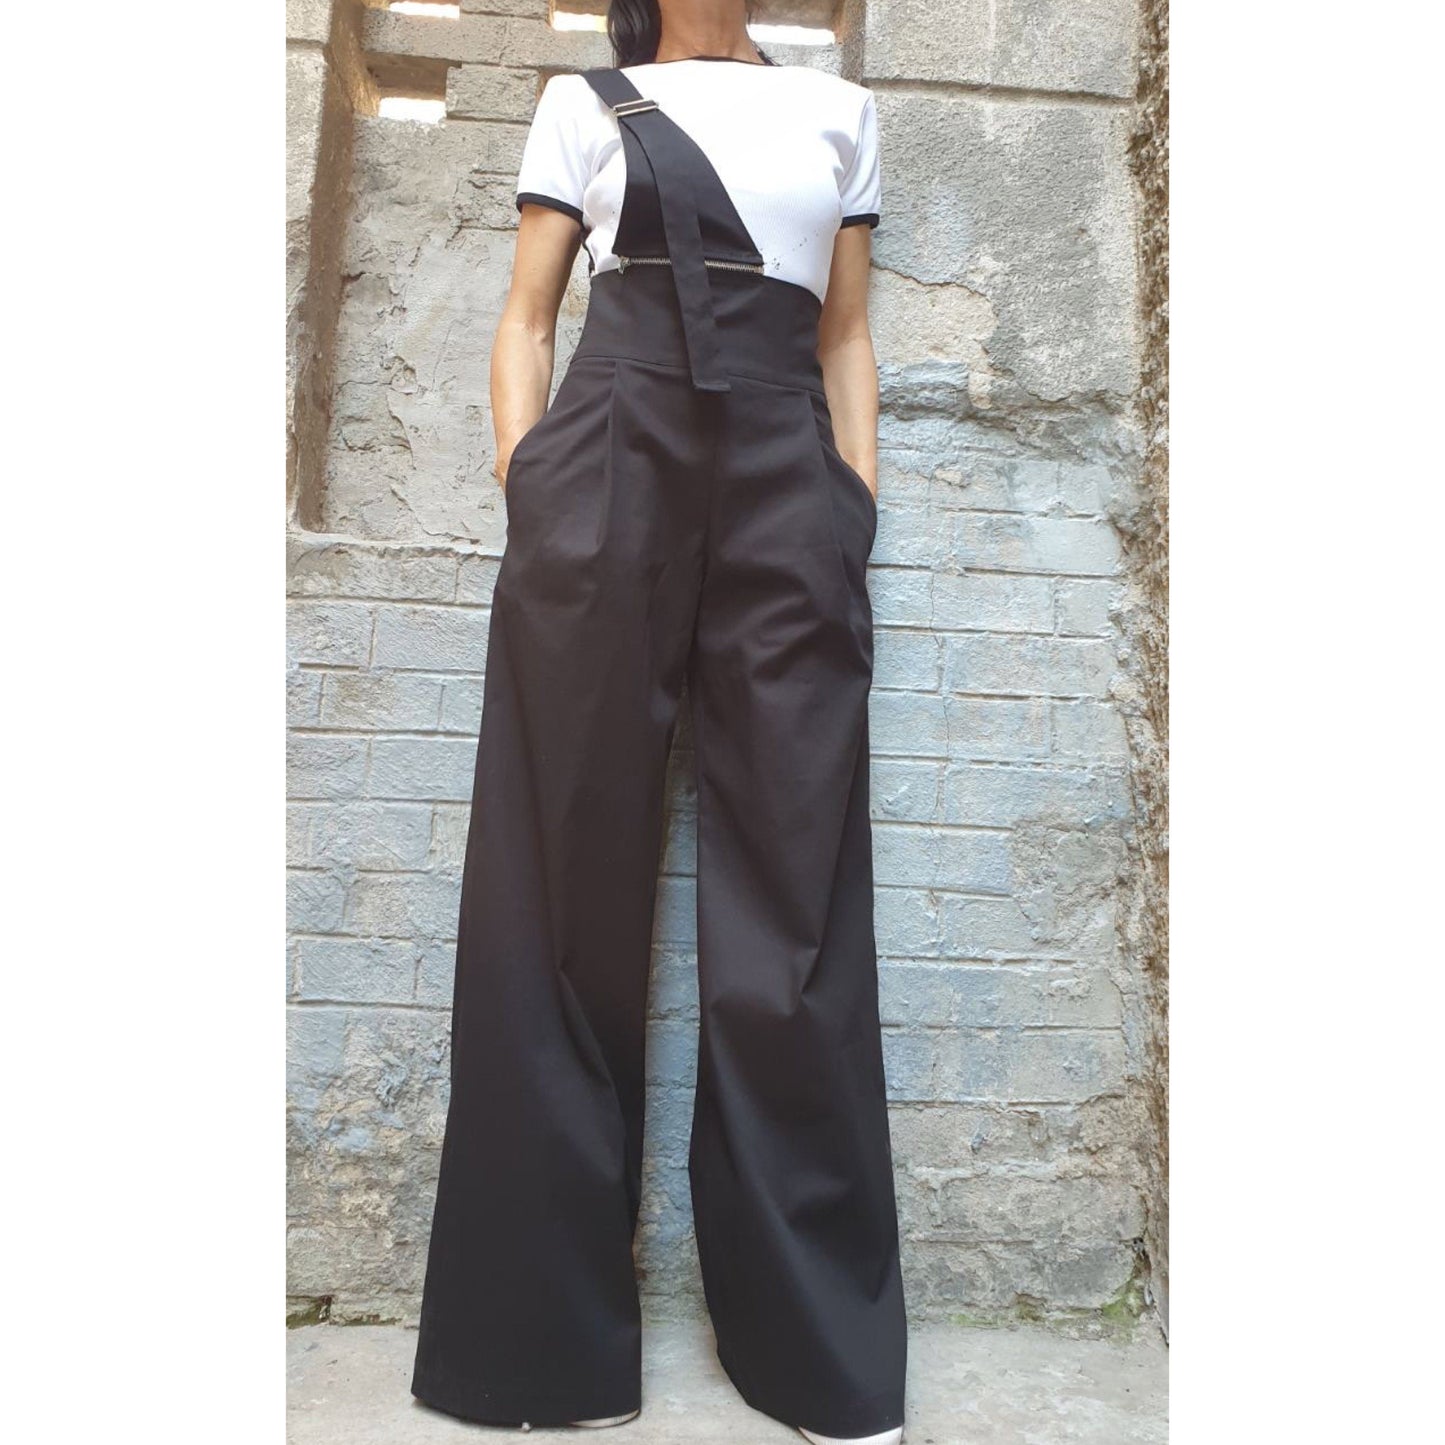 New Collection Extravagant Pants - Handmade clothing from AngelBySilvia - Top Designer Brands 